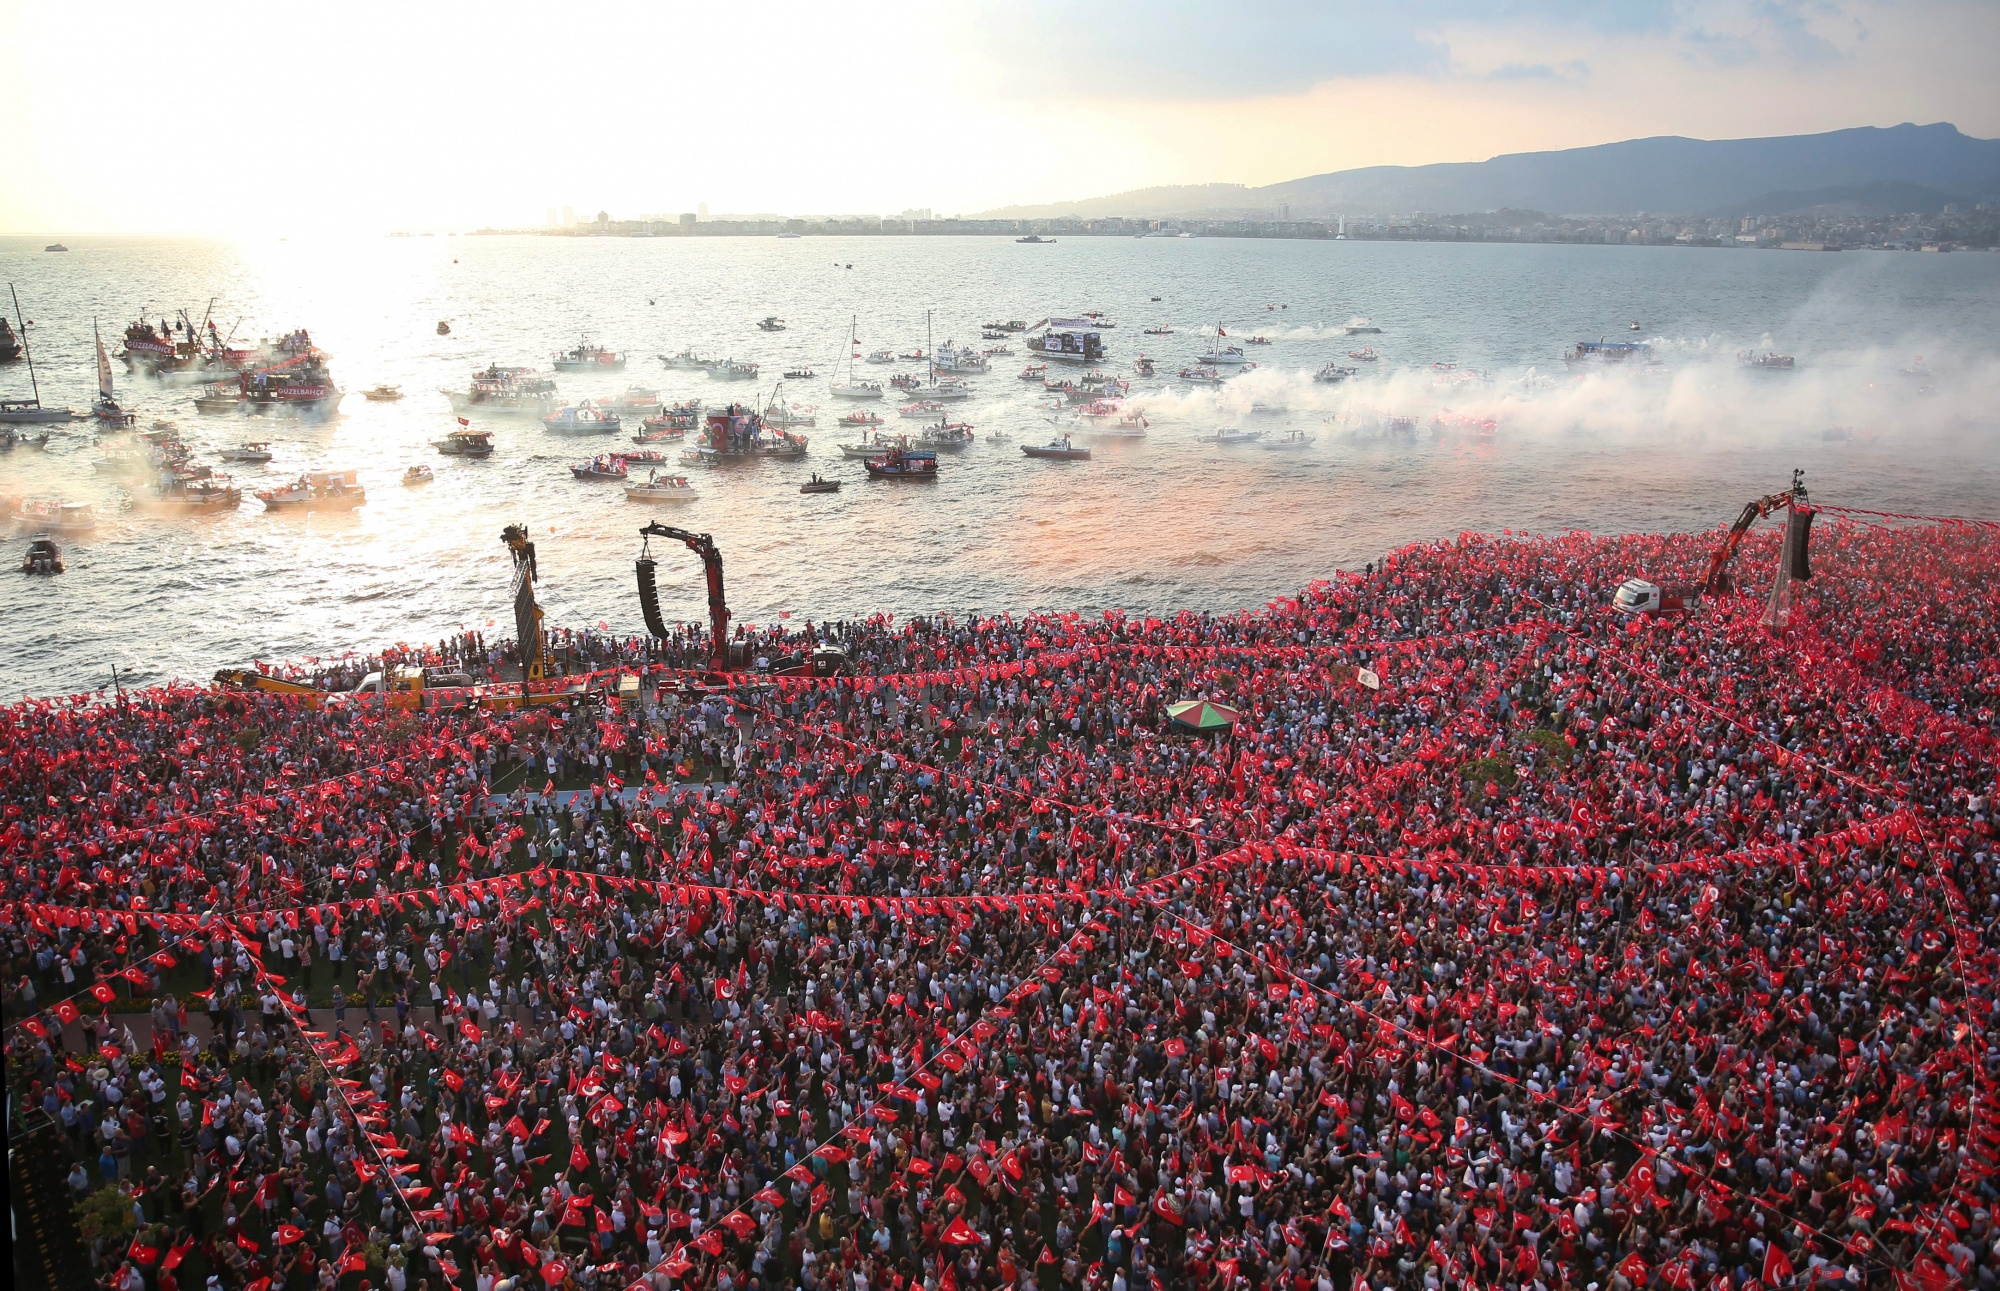 Thousands of supporters of Muharrem Ince, the presidential candidate of Turkey's main opposition Republican People's Party, attend a rally in Izmir, Turkey, Thursday, June 21, 2018. Ince is seen as a strong contender to end President Recep Tayyip Erdogan's 16 year rule in presidential elections on June 24, 2018. (AP Photo/Emre Tazegul) APTOPIX Turkey Elections